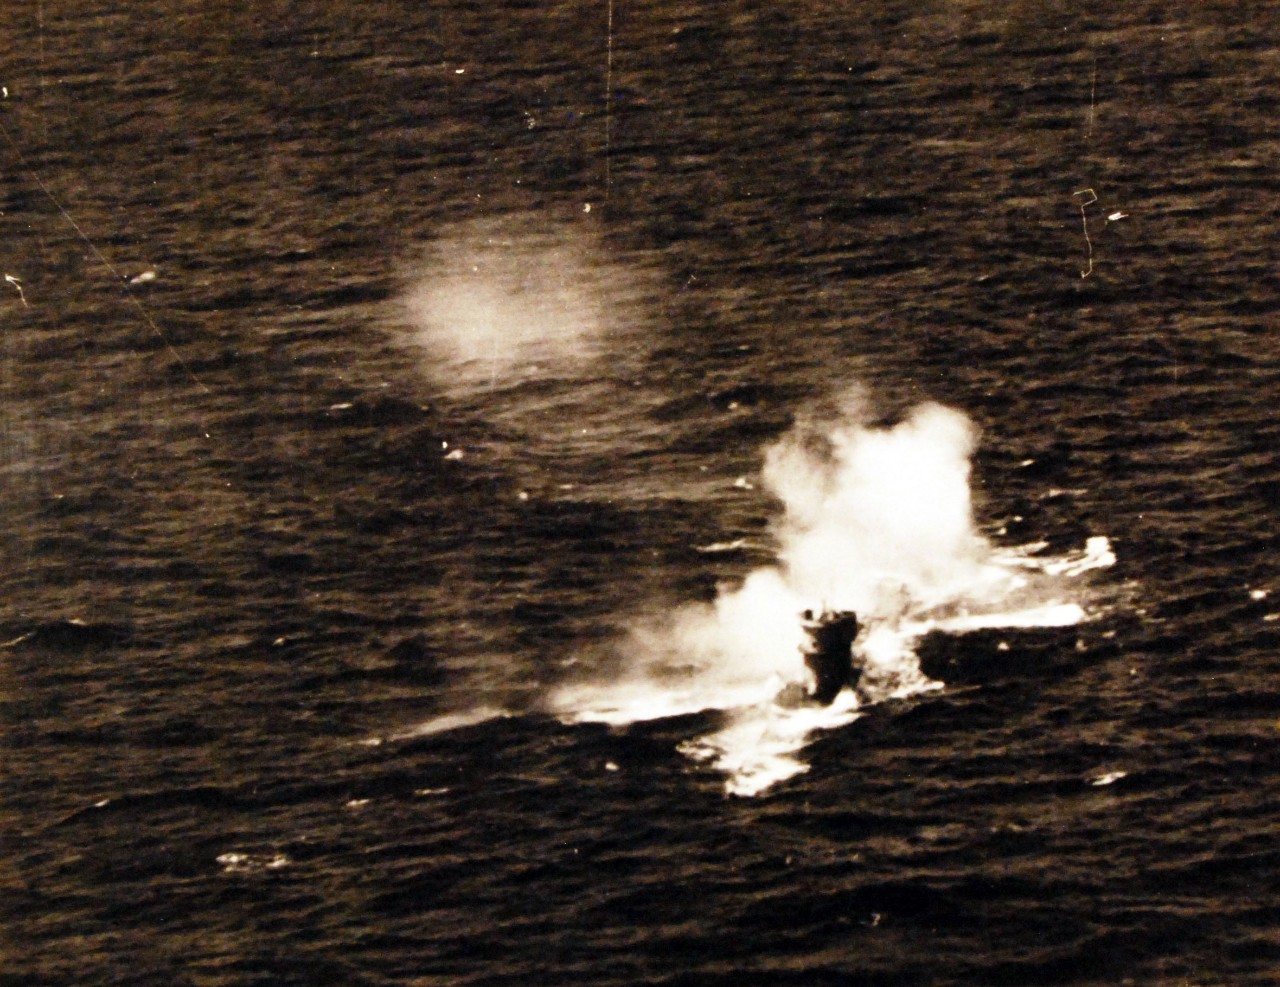 <p>80-G-77193: Air Attacks on German U-boats, WWII.&nbsp; &nbsp;&nbsp;German submarine, U-84, damaged by plane from USS Core (CVE 13), piloted by Ensign William McClane, probably from August 7, 1943.&nbsp;&nbsp; The U-boat was sunk in the North Atlantic, south-west of Bermuda by a Fido homing torpedo fired from a PB4Y “Liberator” aircraft from Bombing Squadron One Hundred Five (VB-105).&nbsp; &nbsp;&nbsp;&nbsp;Incident #4085.&nbsp;&nbsp;&nbsp;&nbsp;&nbsp; Released August 23, 1943.&nbsp; &nbsp;</p>
